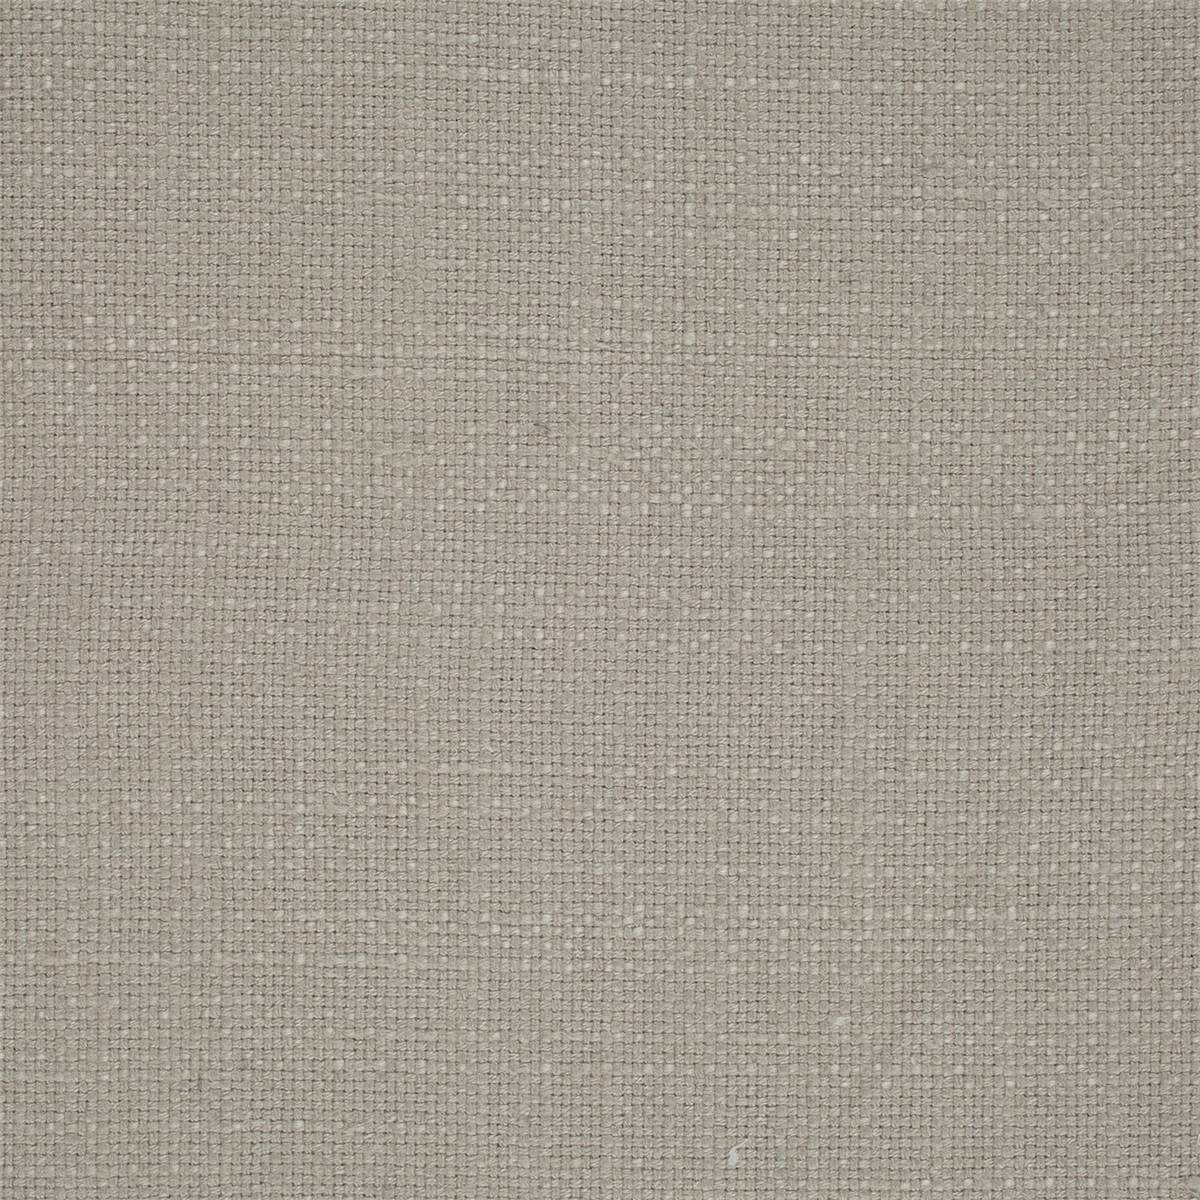 Tuscany Linen Fabric by Sanderson